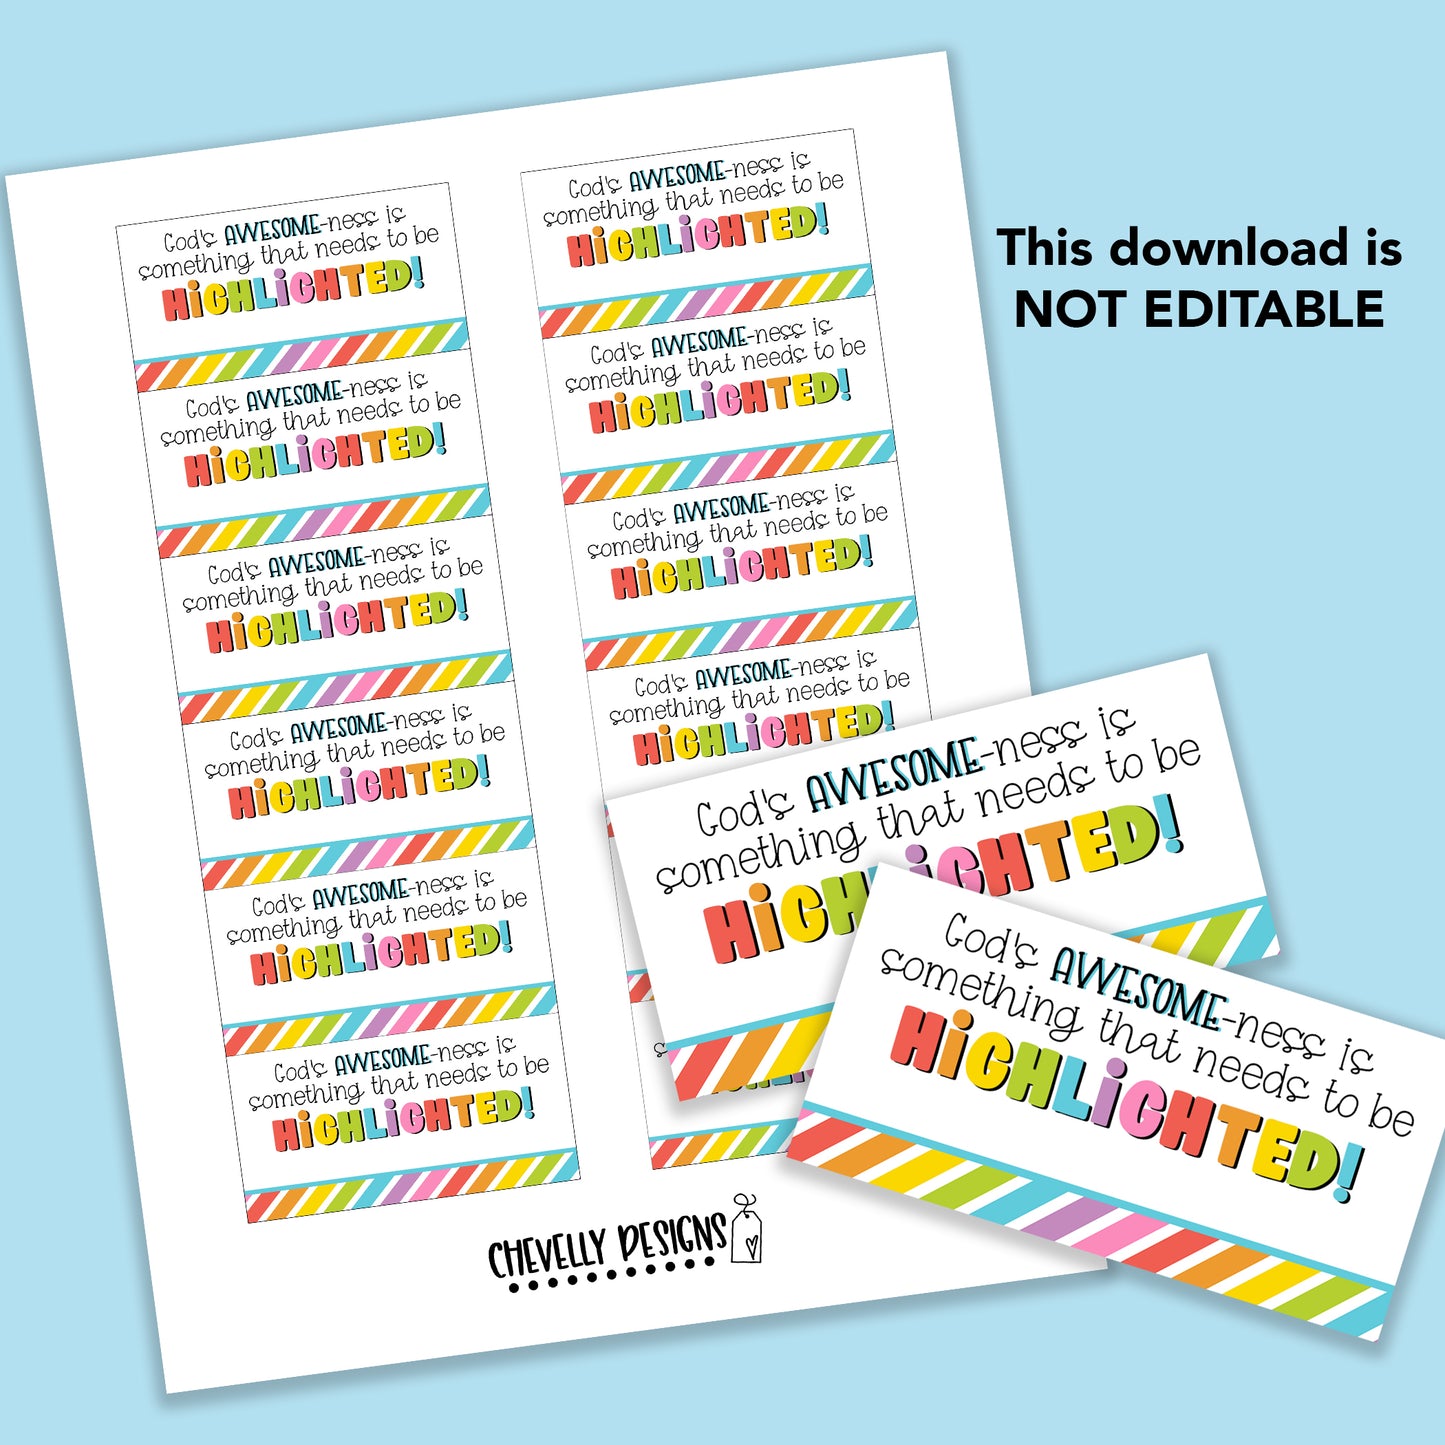 Printable - God's Awesome-ness Needs to be Highlighted - Highlighter Gift Tags - Instant Digital Download